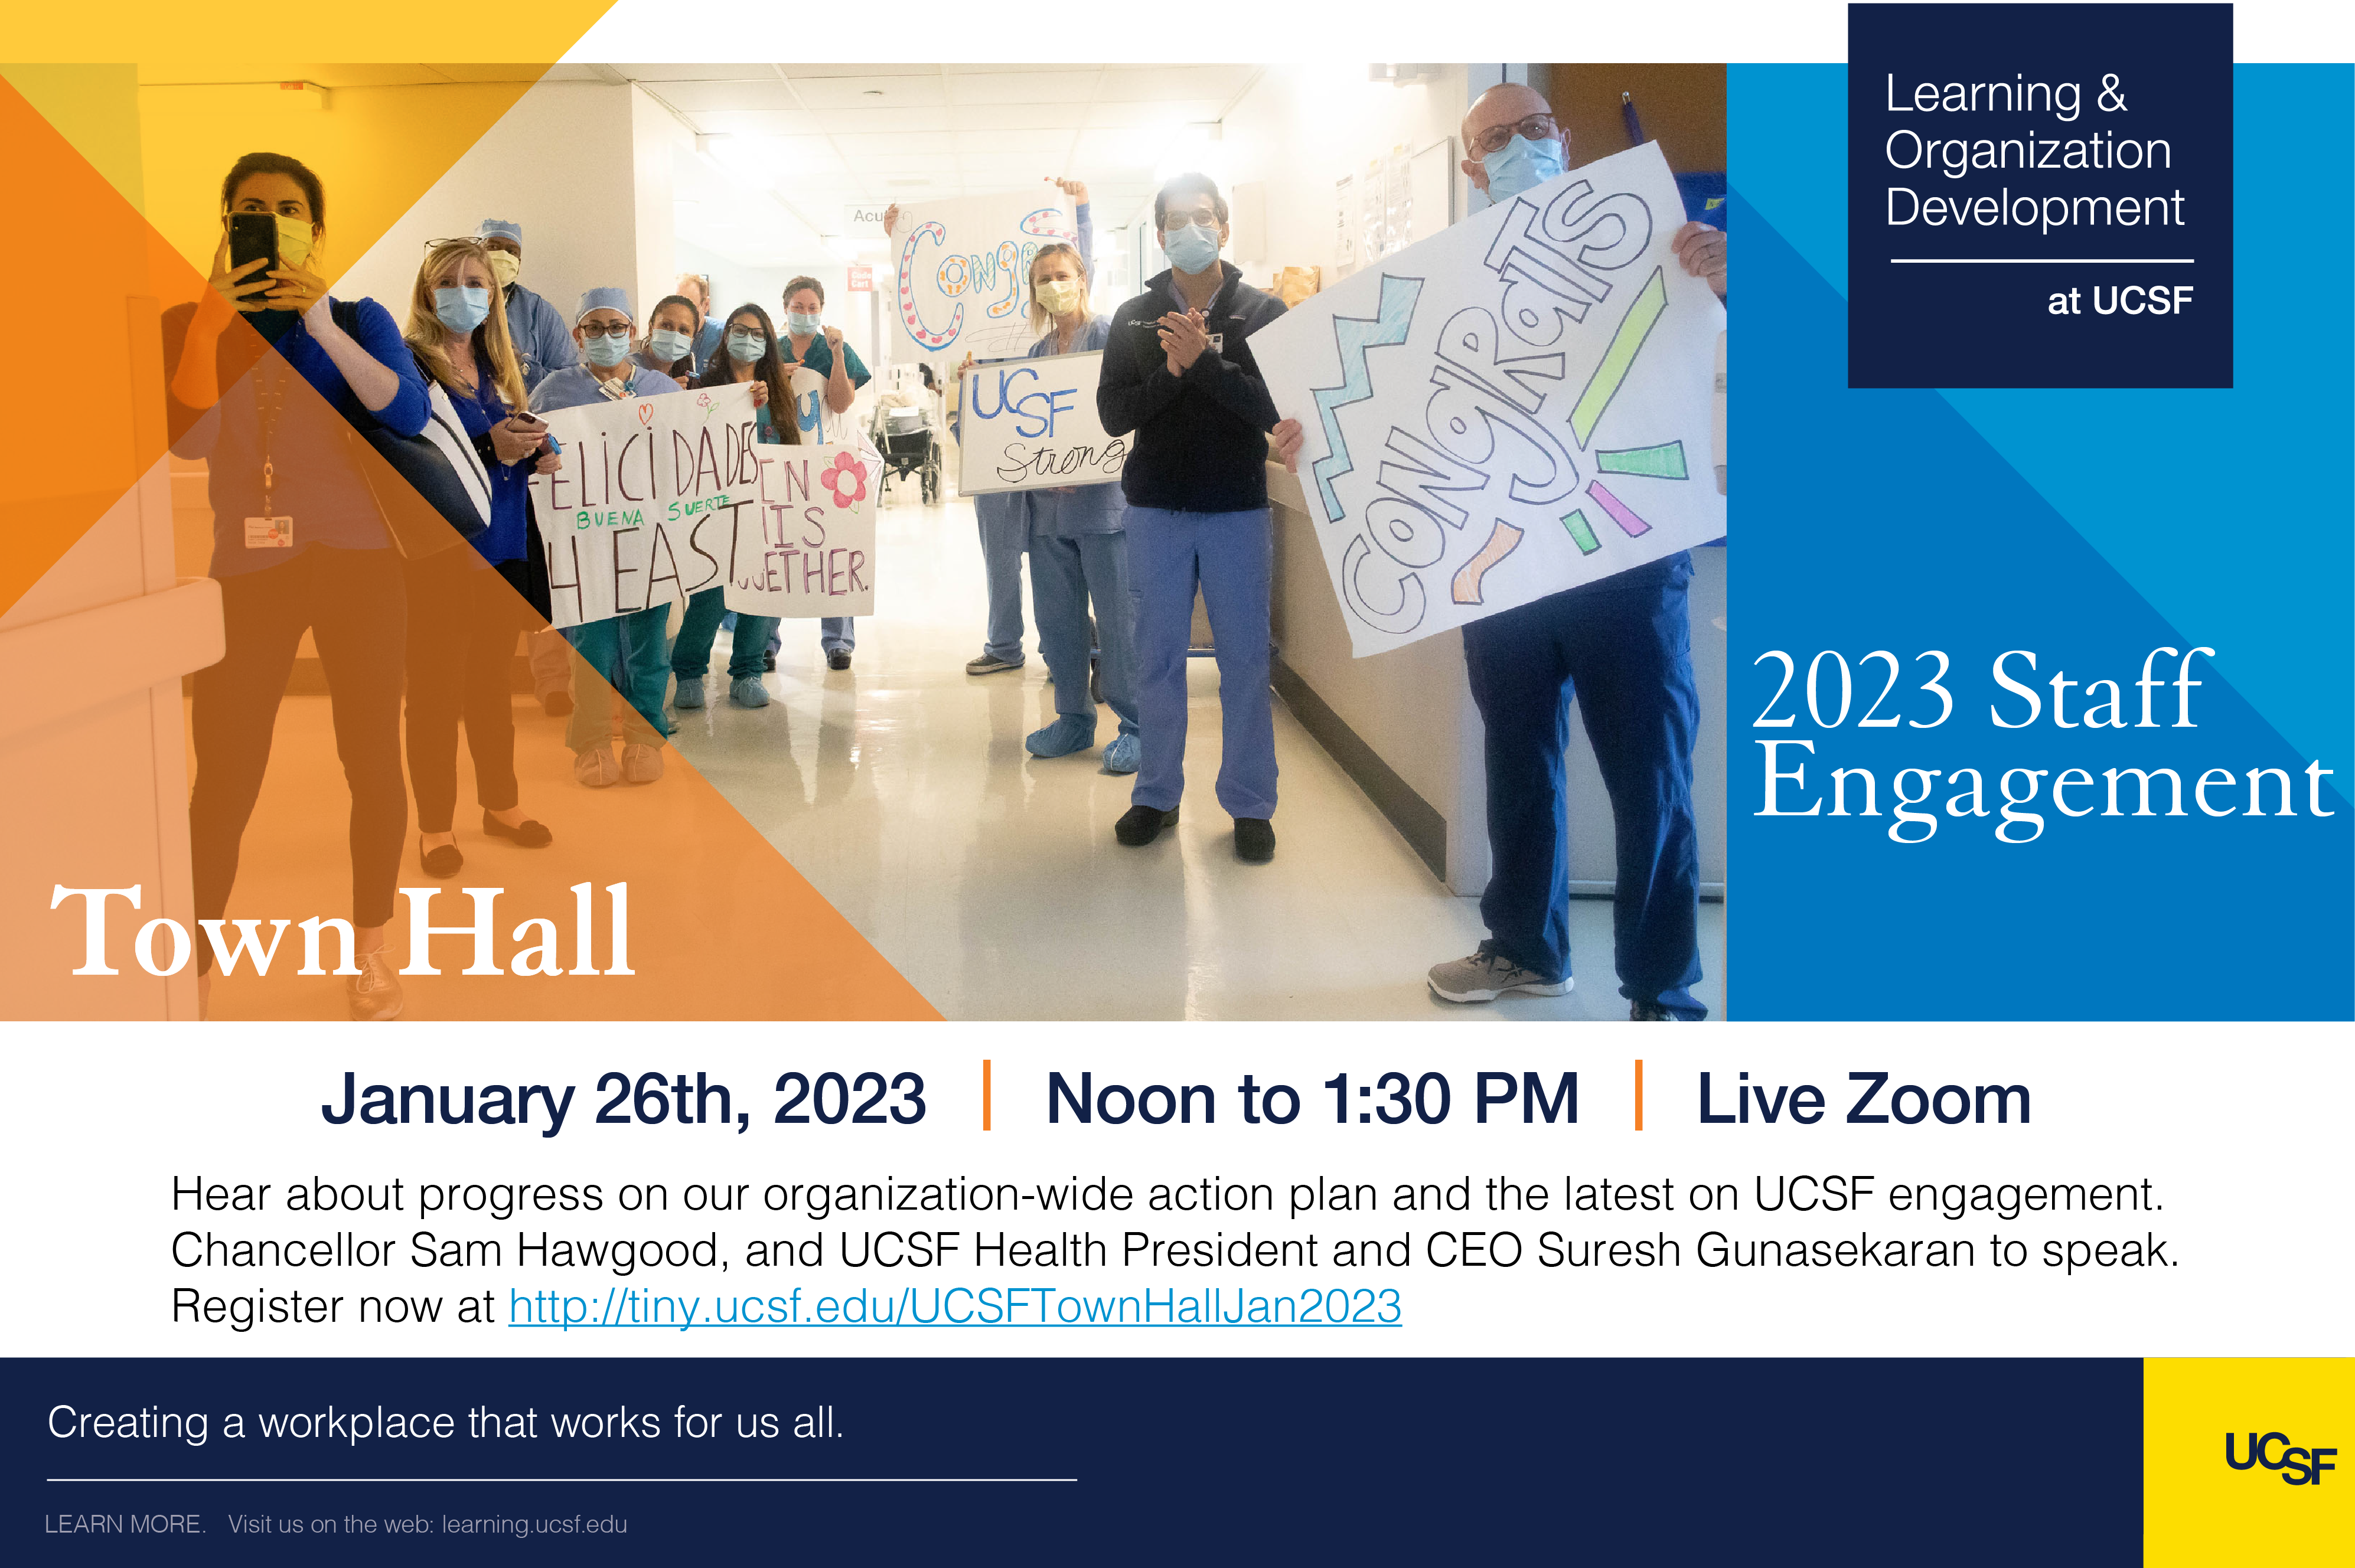 Nurses in scrubs with Town Hall logistics: Jan 26, 2023, noon-1:30pm, live Zoom